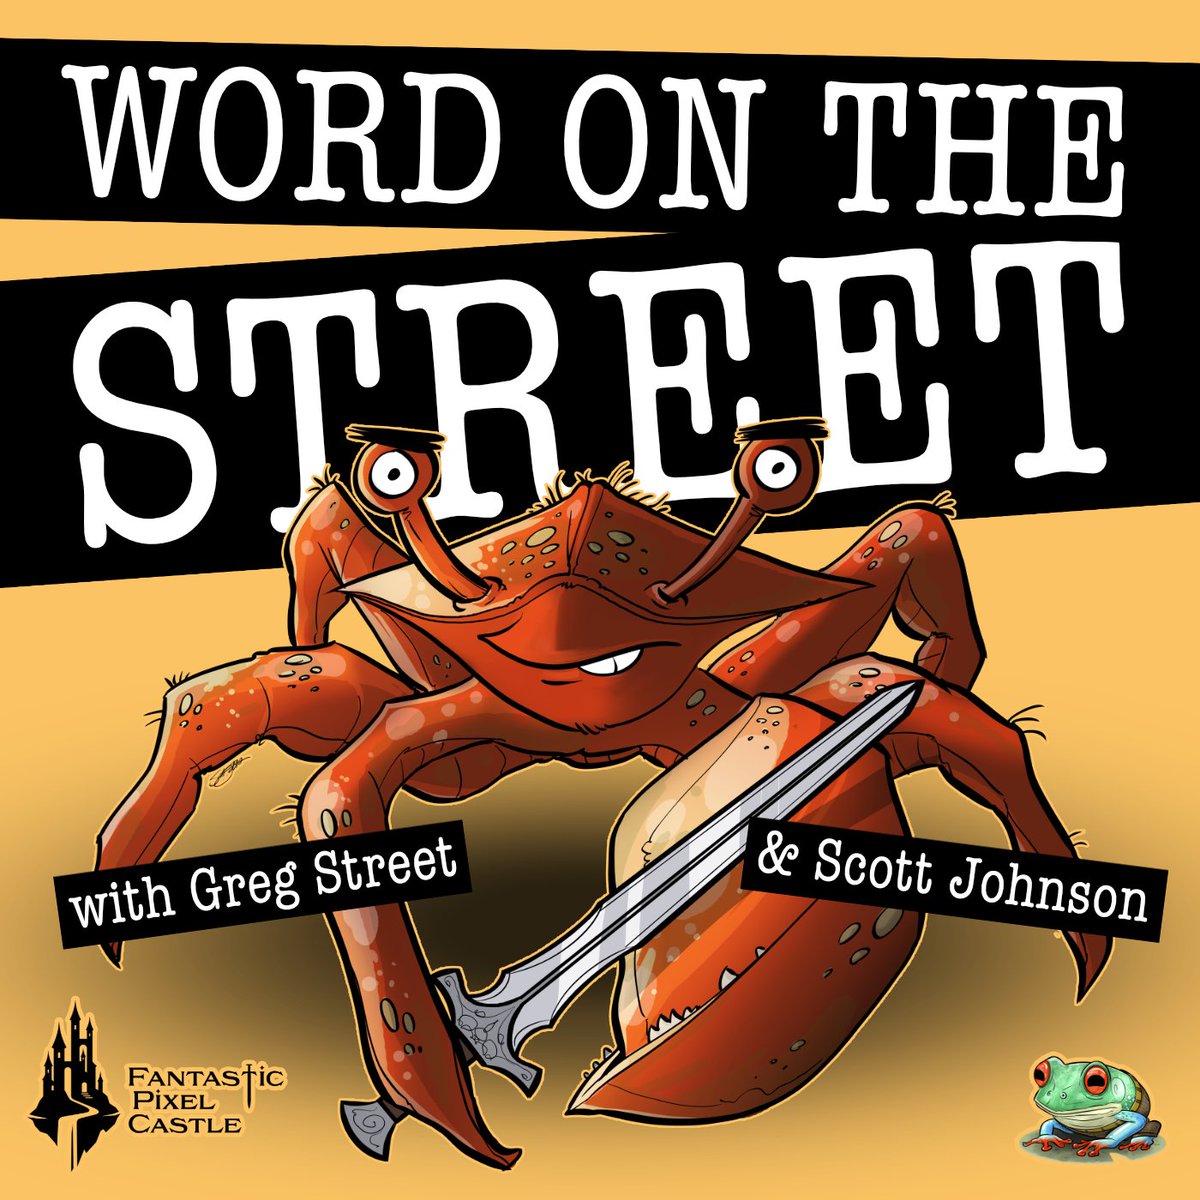 🎙️The first episode of our 'Word on The Street' podcast is live now! Listen to @Ghostcrawler and @scottjohnson talk about what game development is like from day zero! 🔴 youtube.com/watch?v=Ozgnf4…